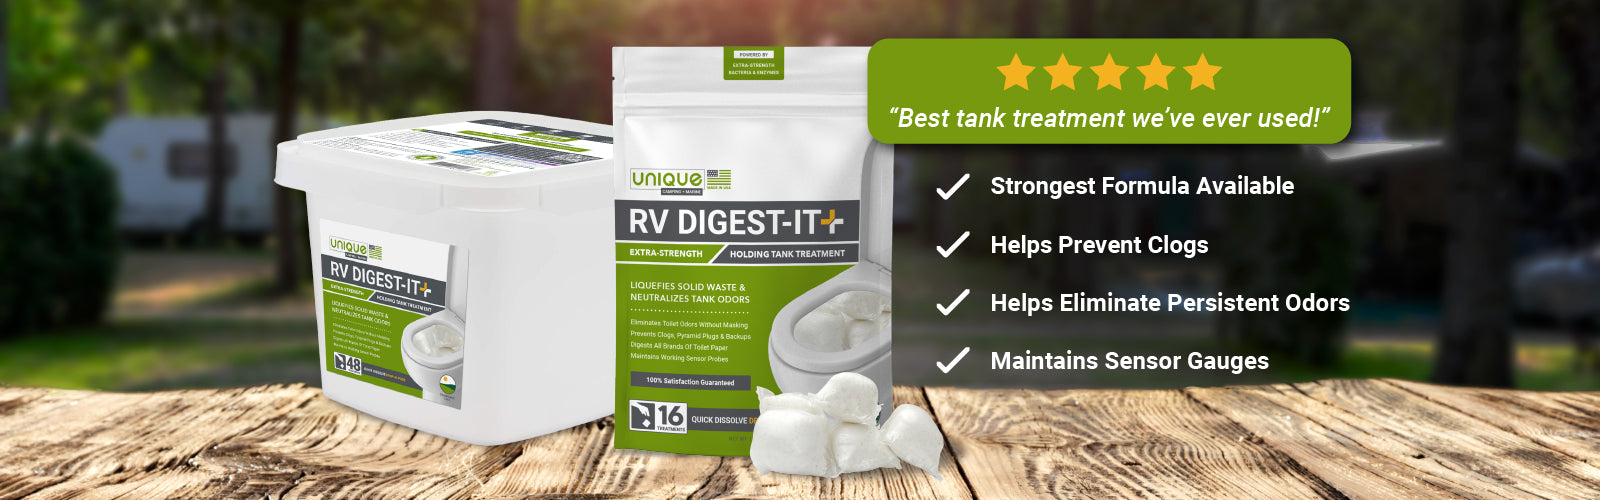 RV Digest-It Plus Drop-In Pods Extra Strength Holding Tank Treatment. Unique Camping + Marine